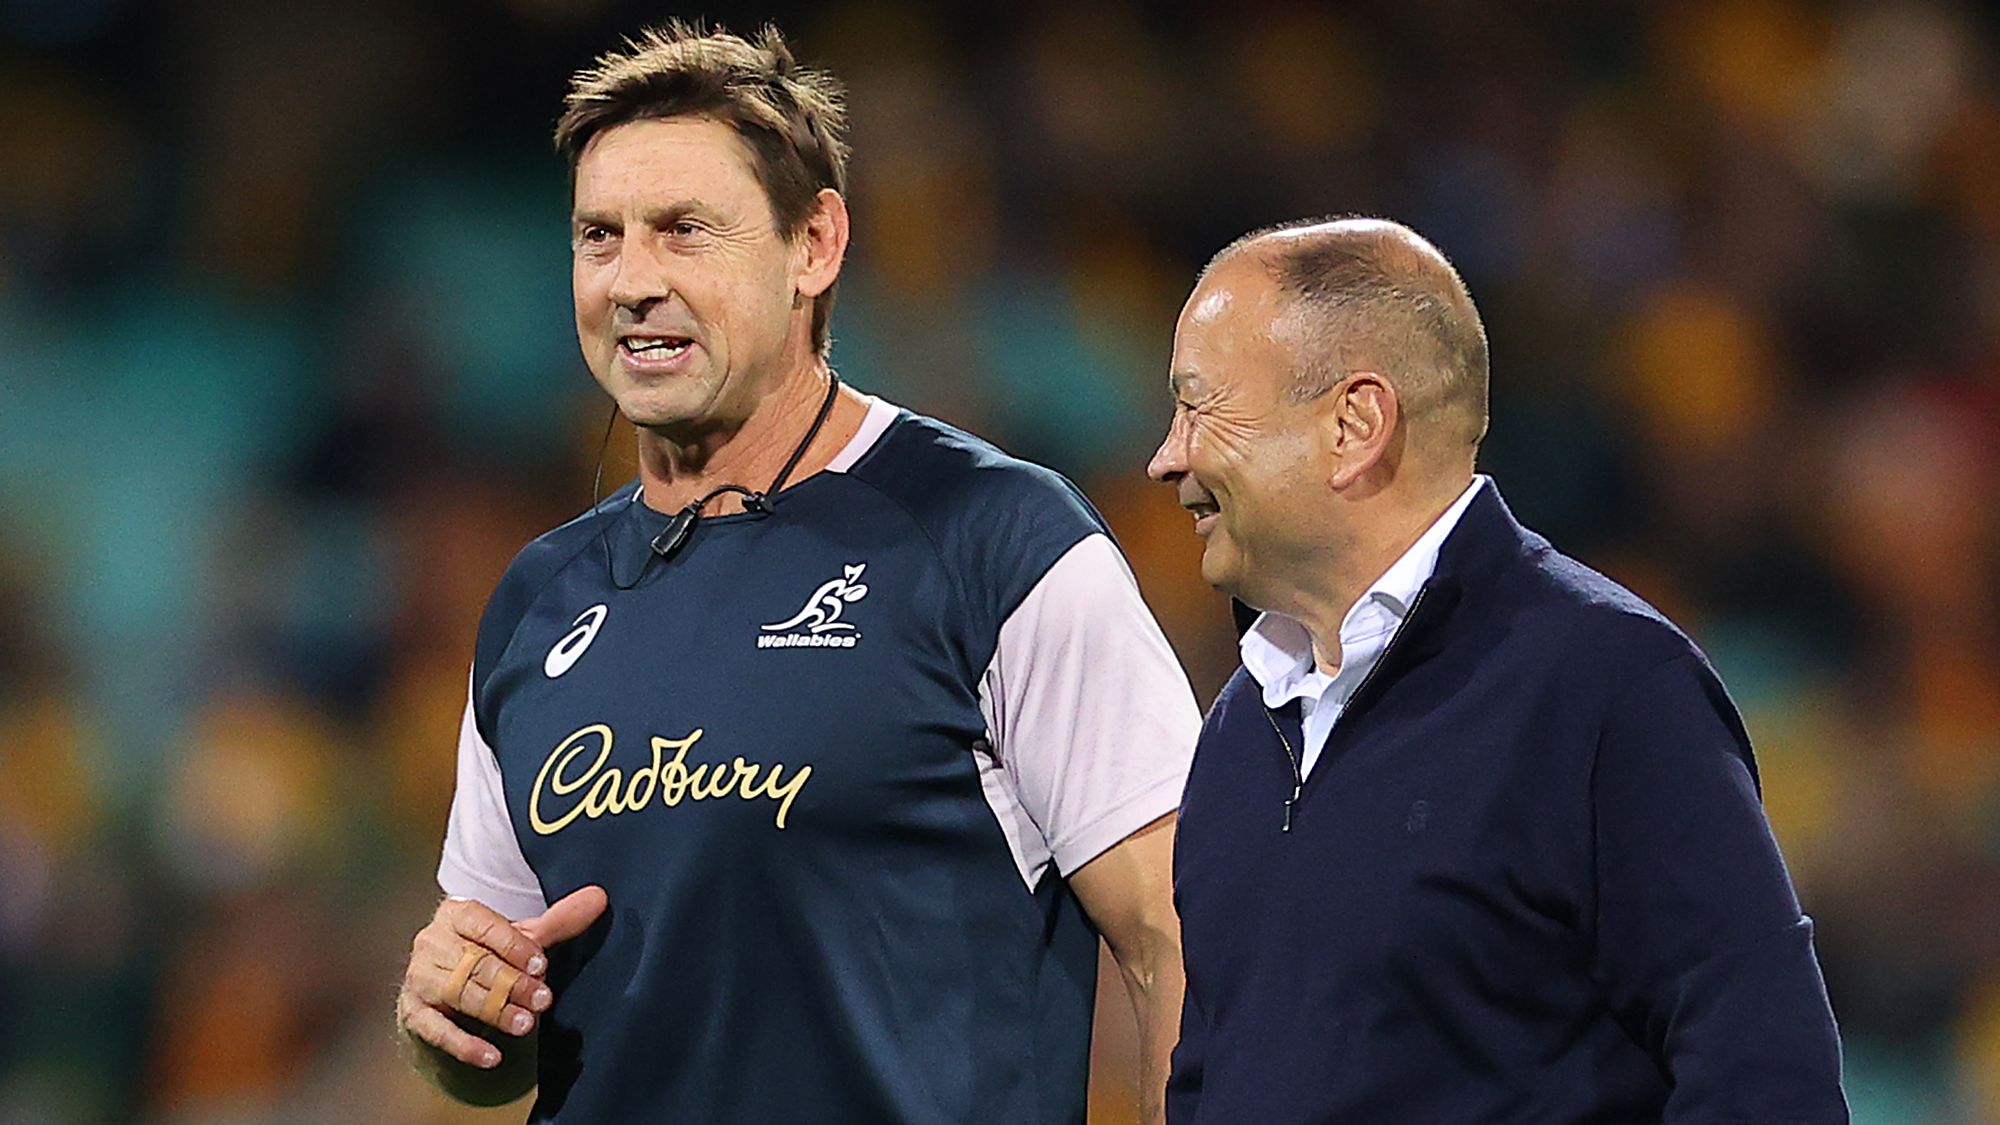 Wallabies attack coach Scott Wisemantel chats with England coach Eddie Jones at the SCG.